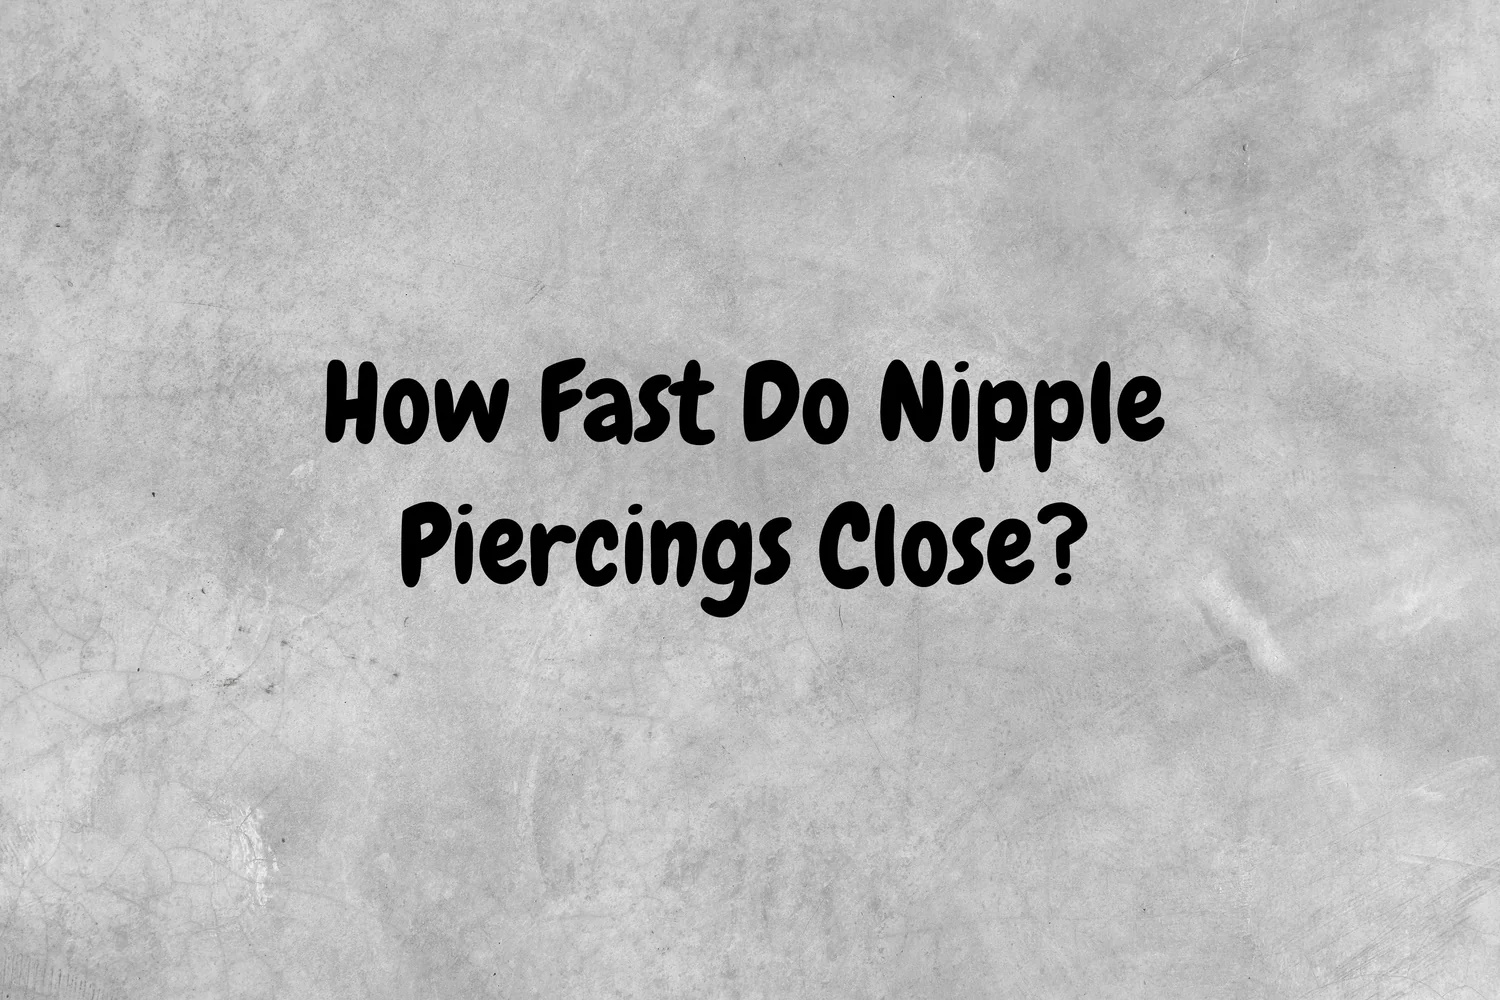 An image with a gray background that has black text asking the question, "How fast do nipple piercings close?"